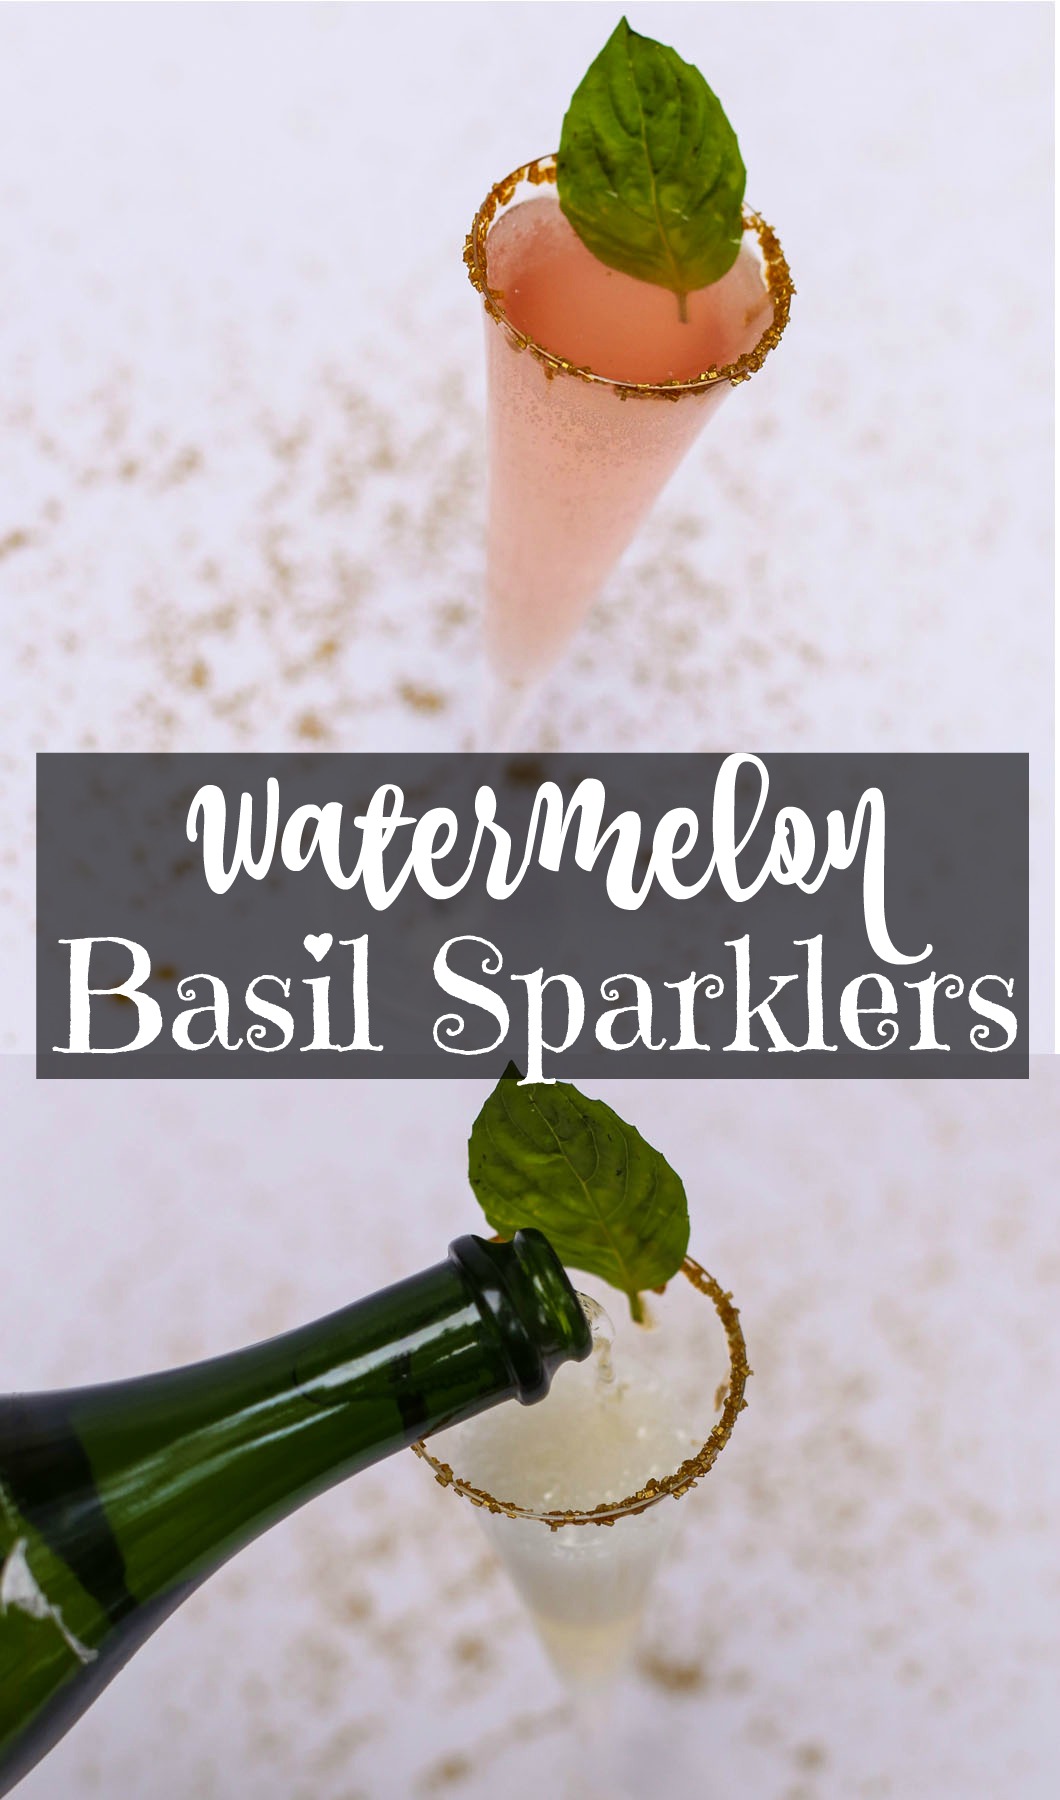 watermelonbasilsparklers - Holiday Beverages: Watermelon Basil Sparklers by Atlanta lifestyle blogger Happily Hughes